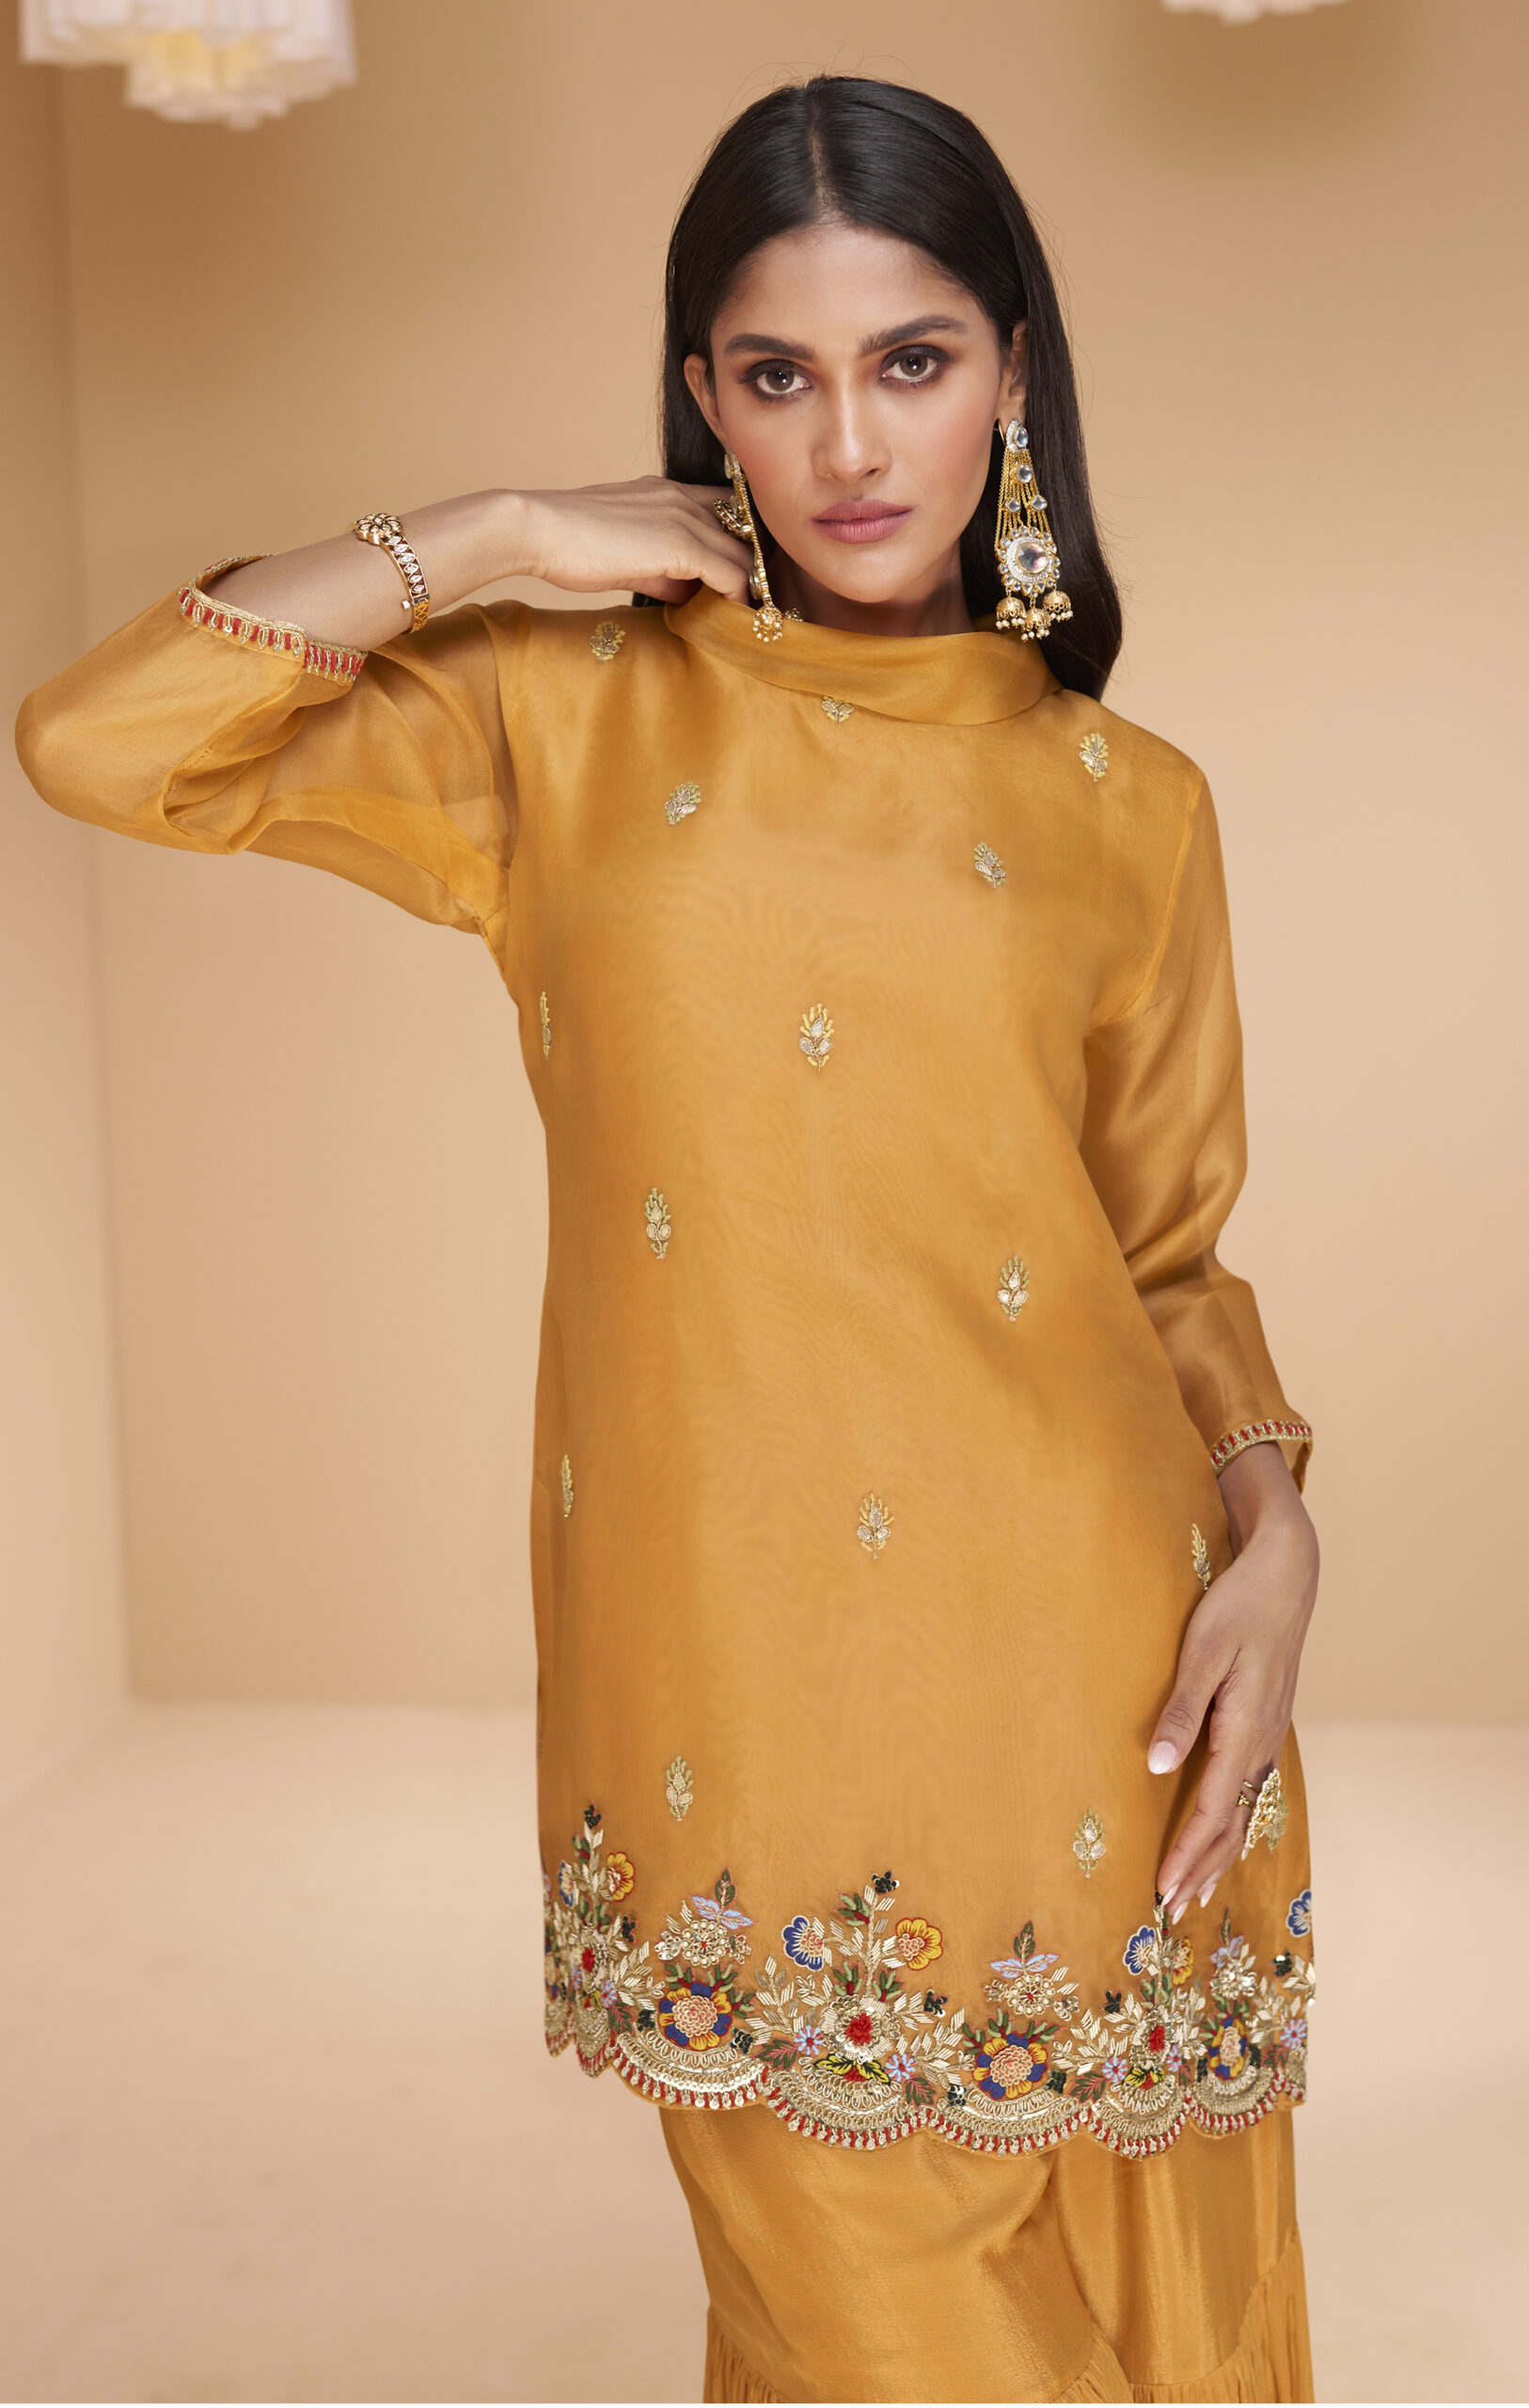 Shop Ethnic Dresses for Women Online in India | Libas